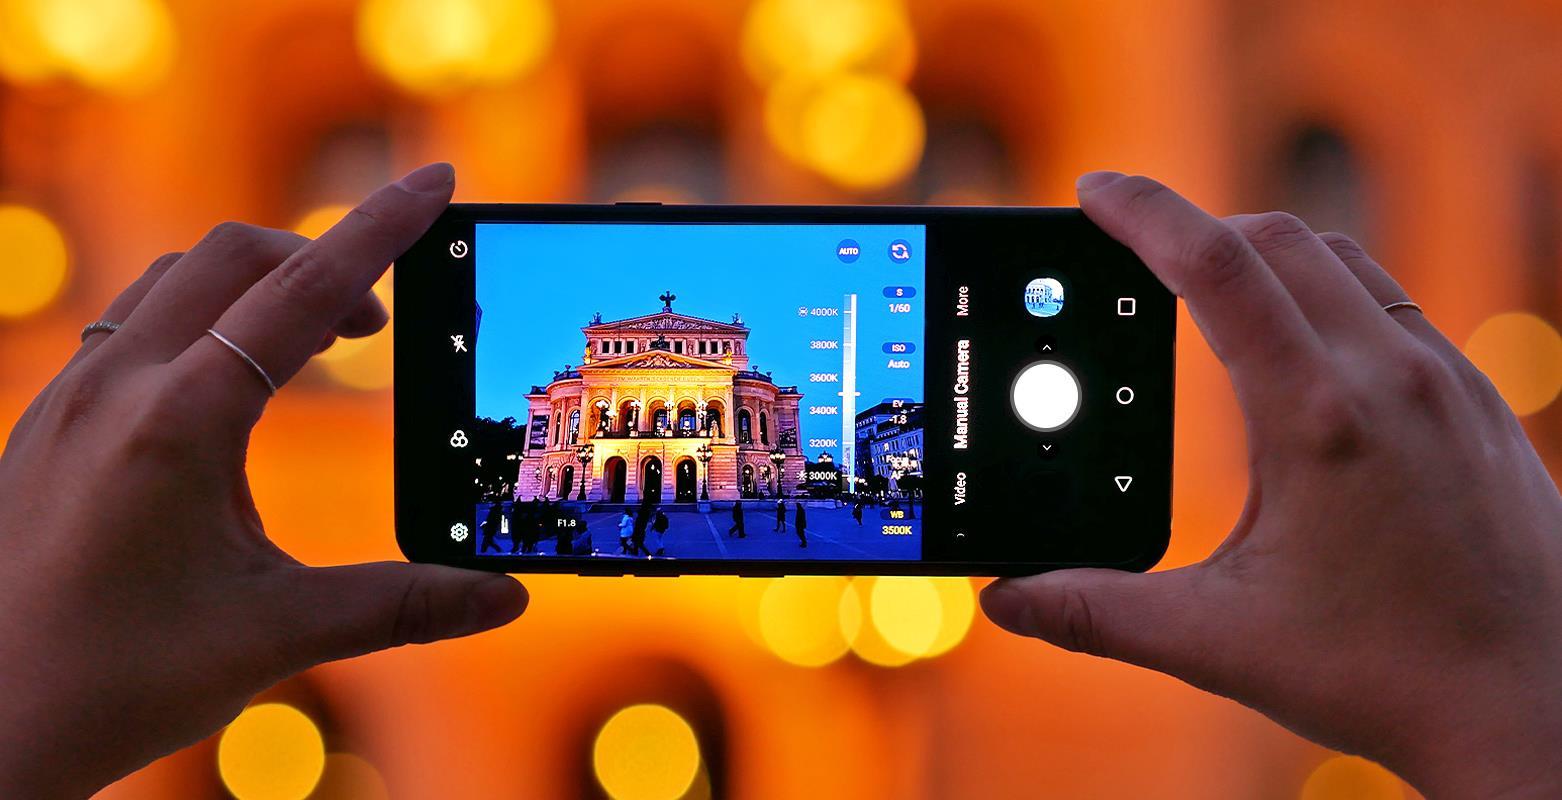 The LG mobile manual camera can compete with DSLRs for camera quality, allowing you to have some control over how your picture looks | More at LG MAGAZINE